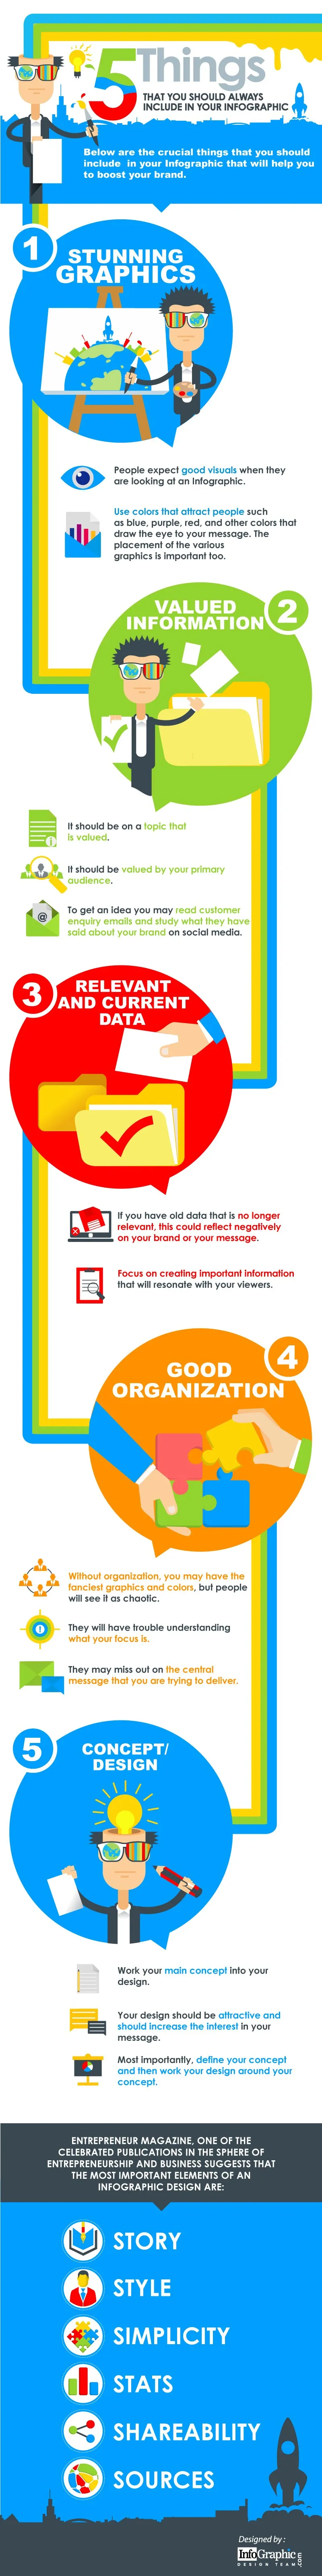 5 Things You Should Always Include in Your #Infographic